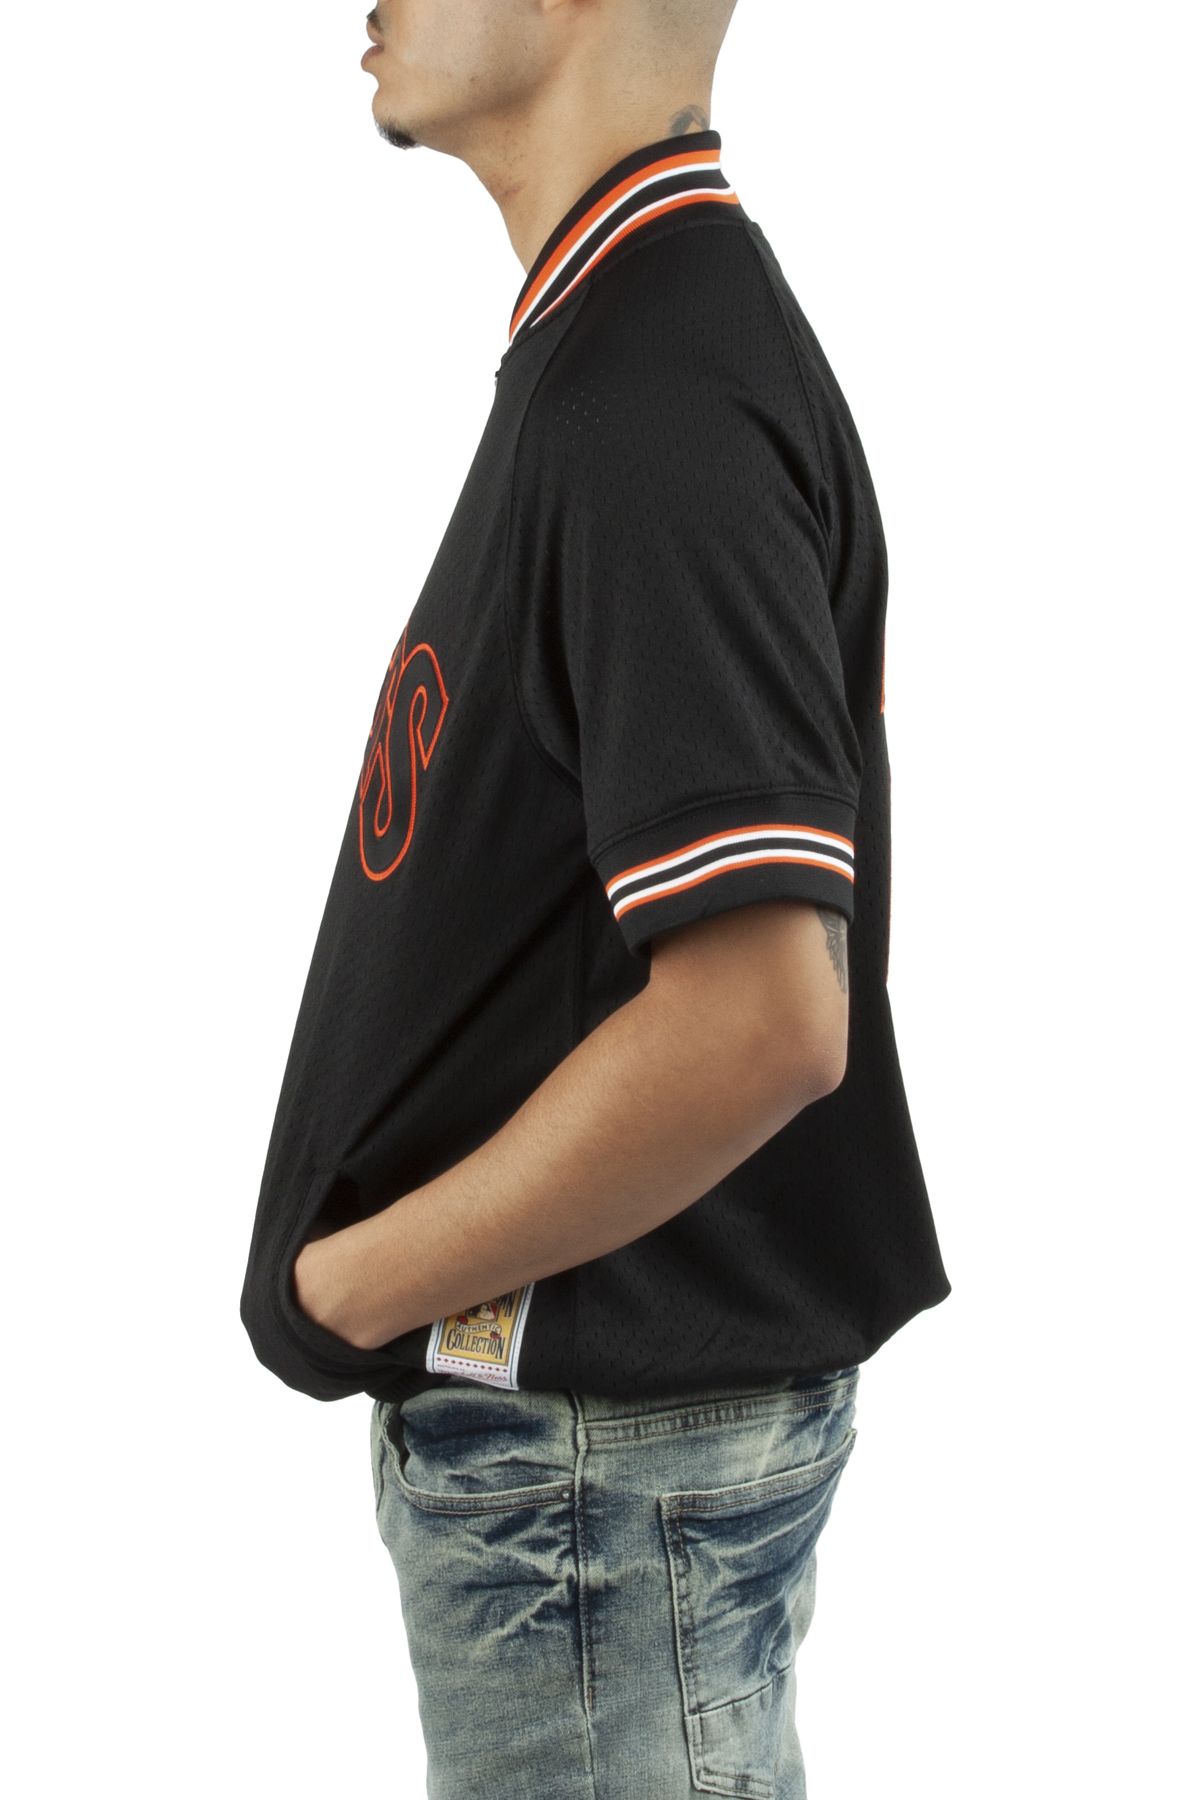 Will Clark San Francisco Giants Nike Cooperstown Collection Name